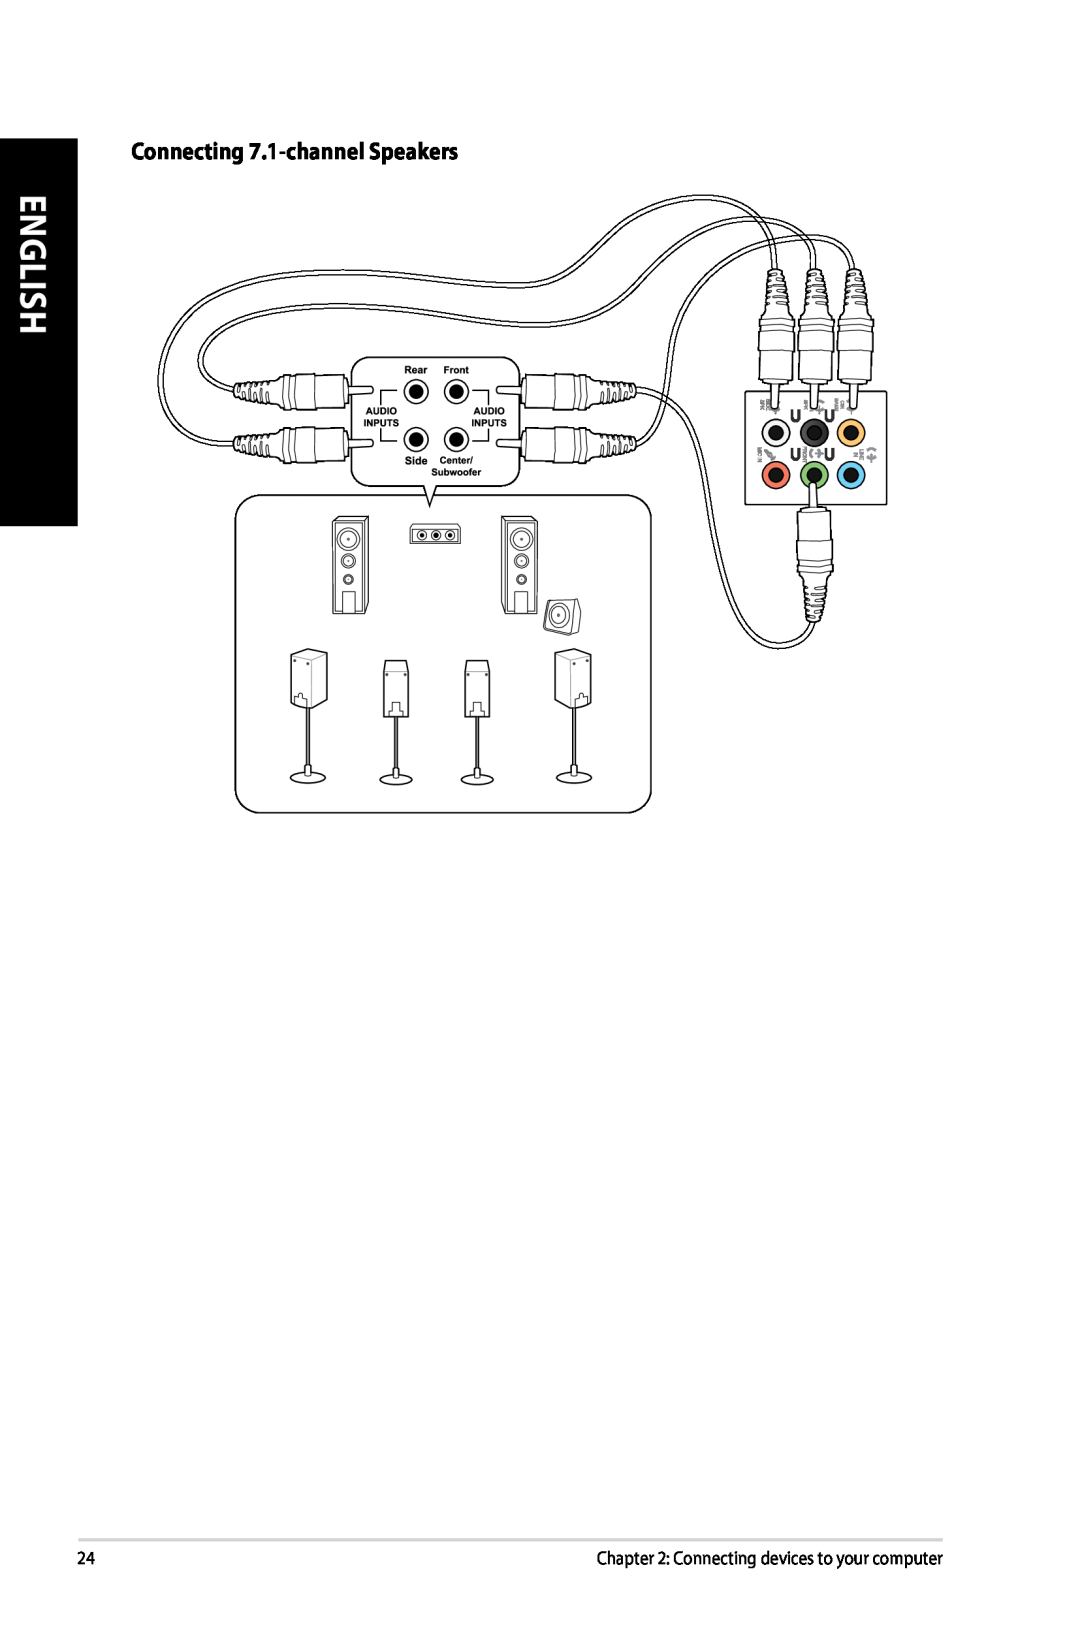 Asus G10AJ manual Connecting 7.1-channel Speakers, English 